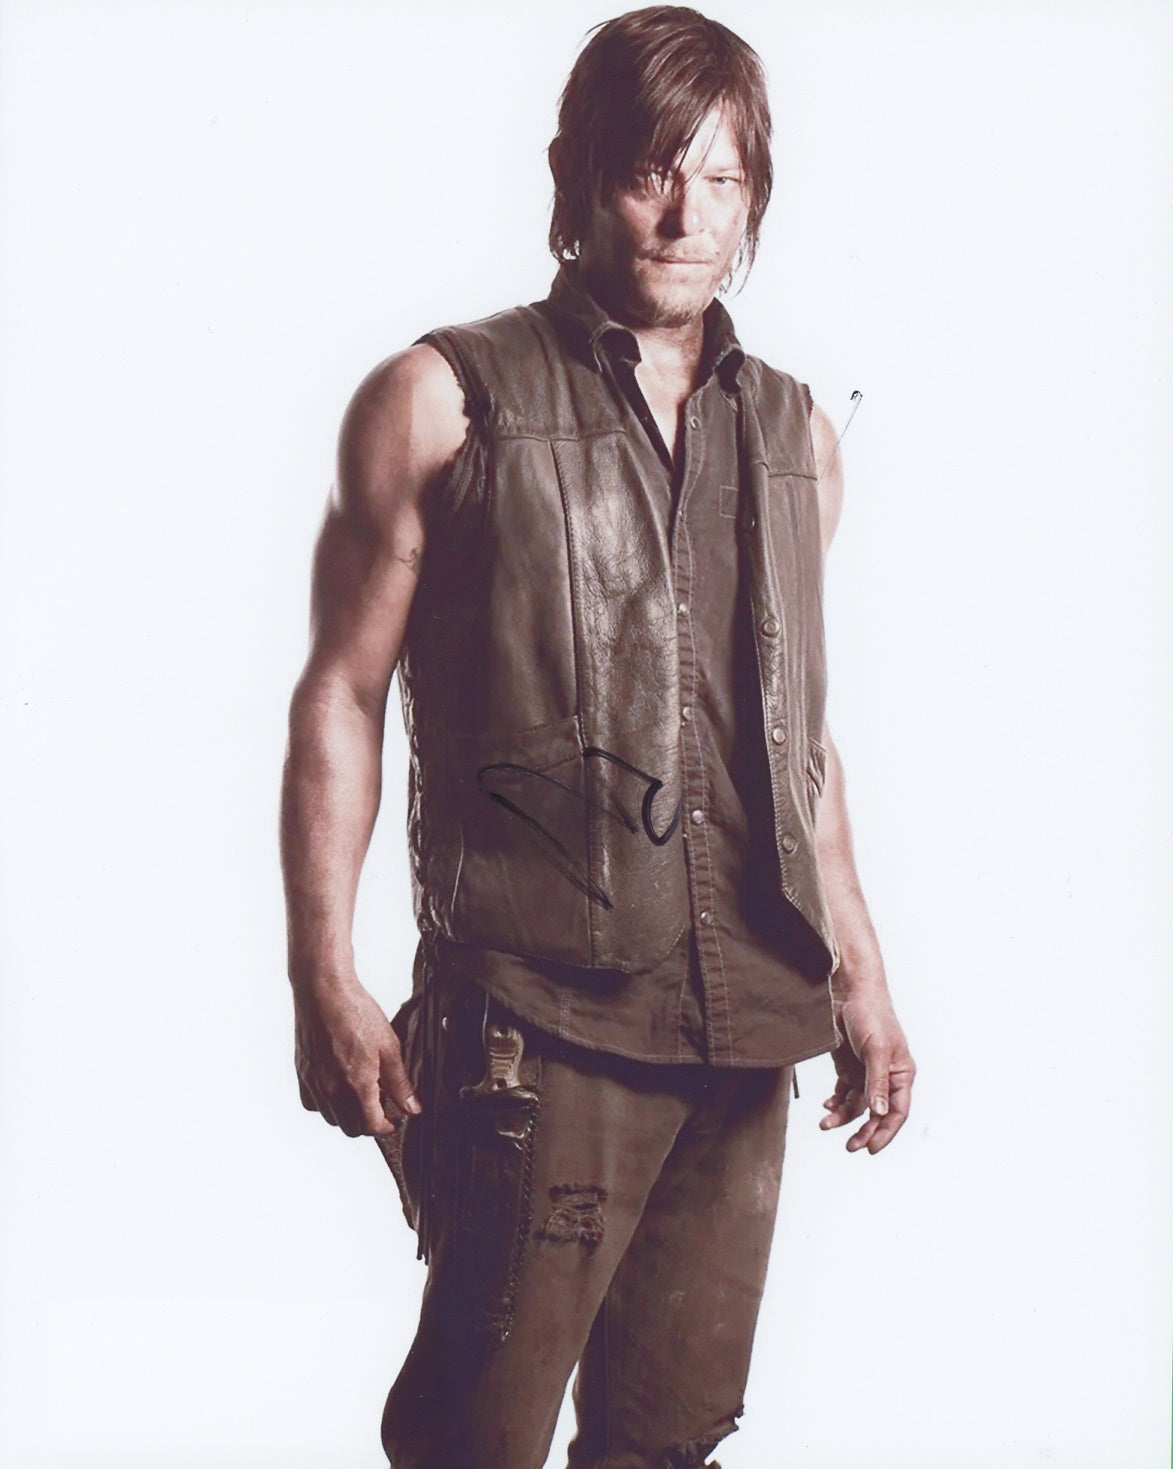 Norman Reedus Signed 8x10 Photo